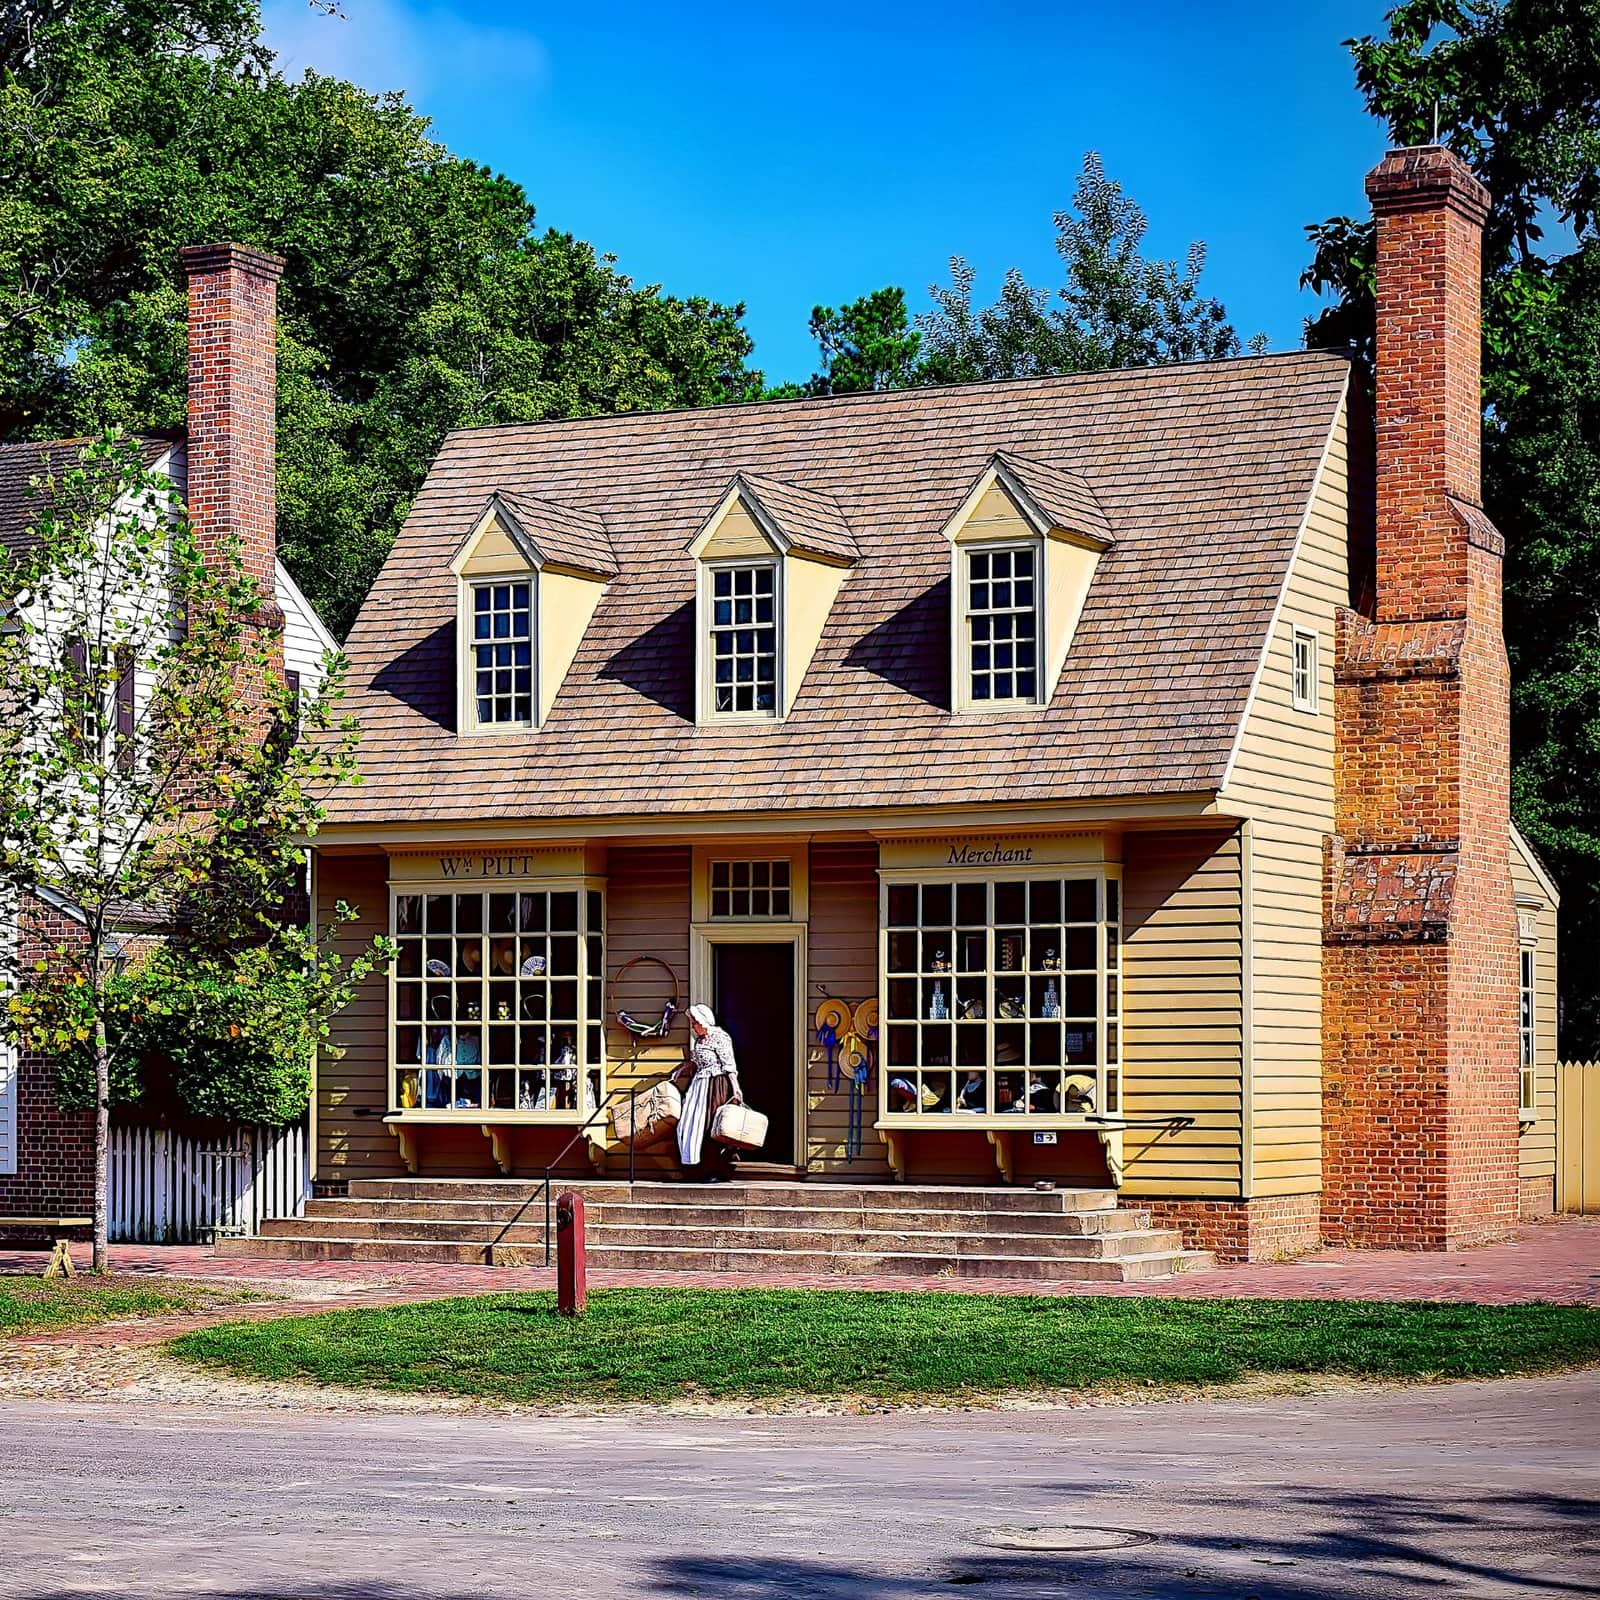 sell commercial real estate in Williamsburg, VA